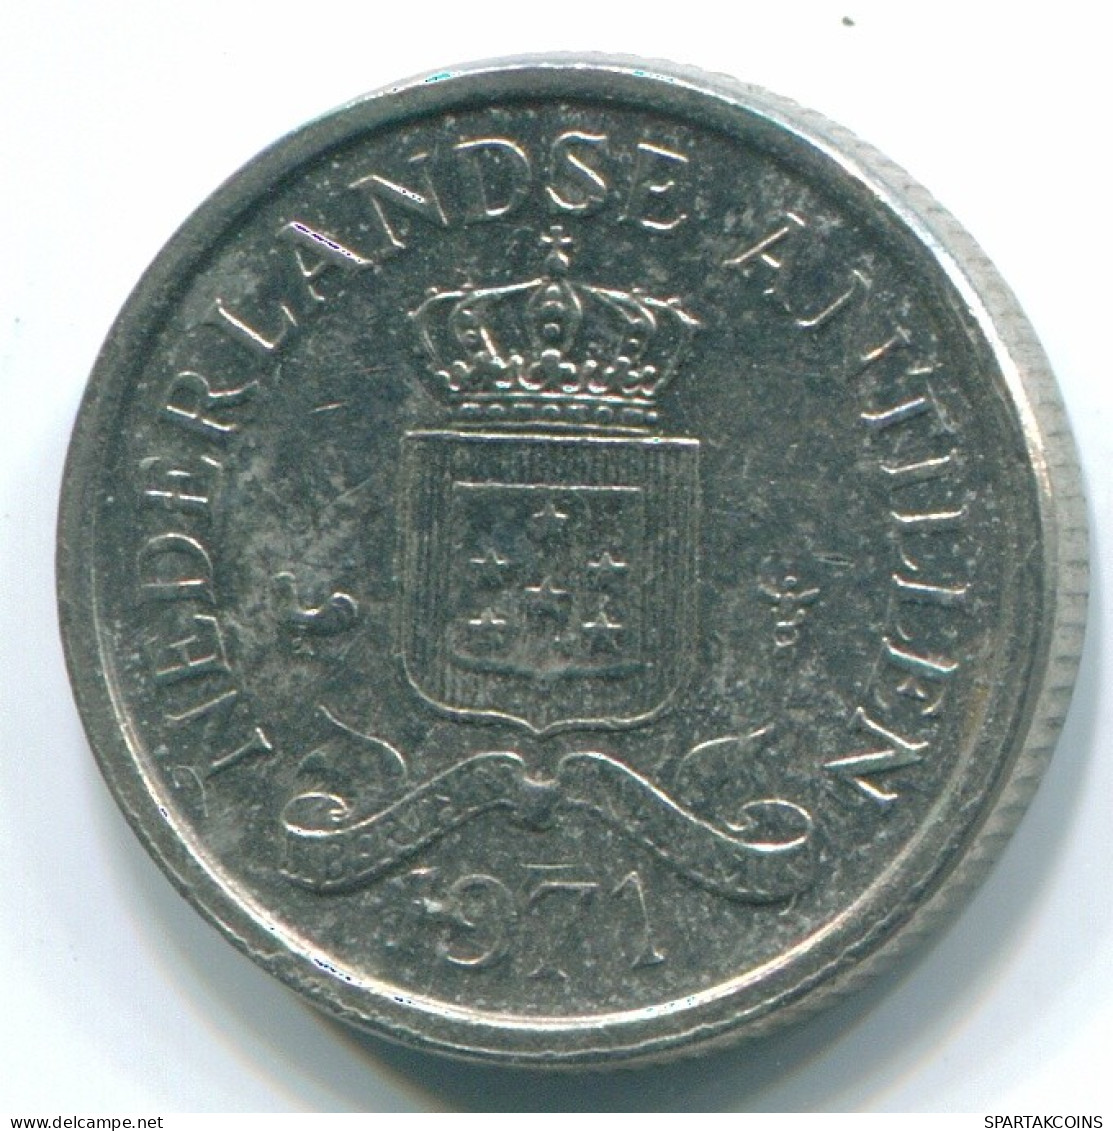 10 CENTS 1971 NETHERLANDS ANTILLES Nickel Colonial Coin #S13472.U.A - Netherlands Antilles